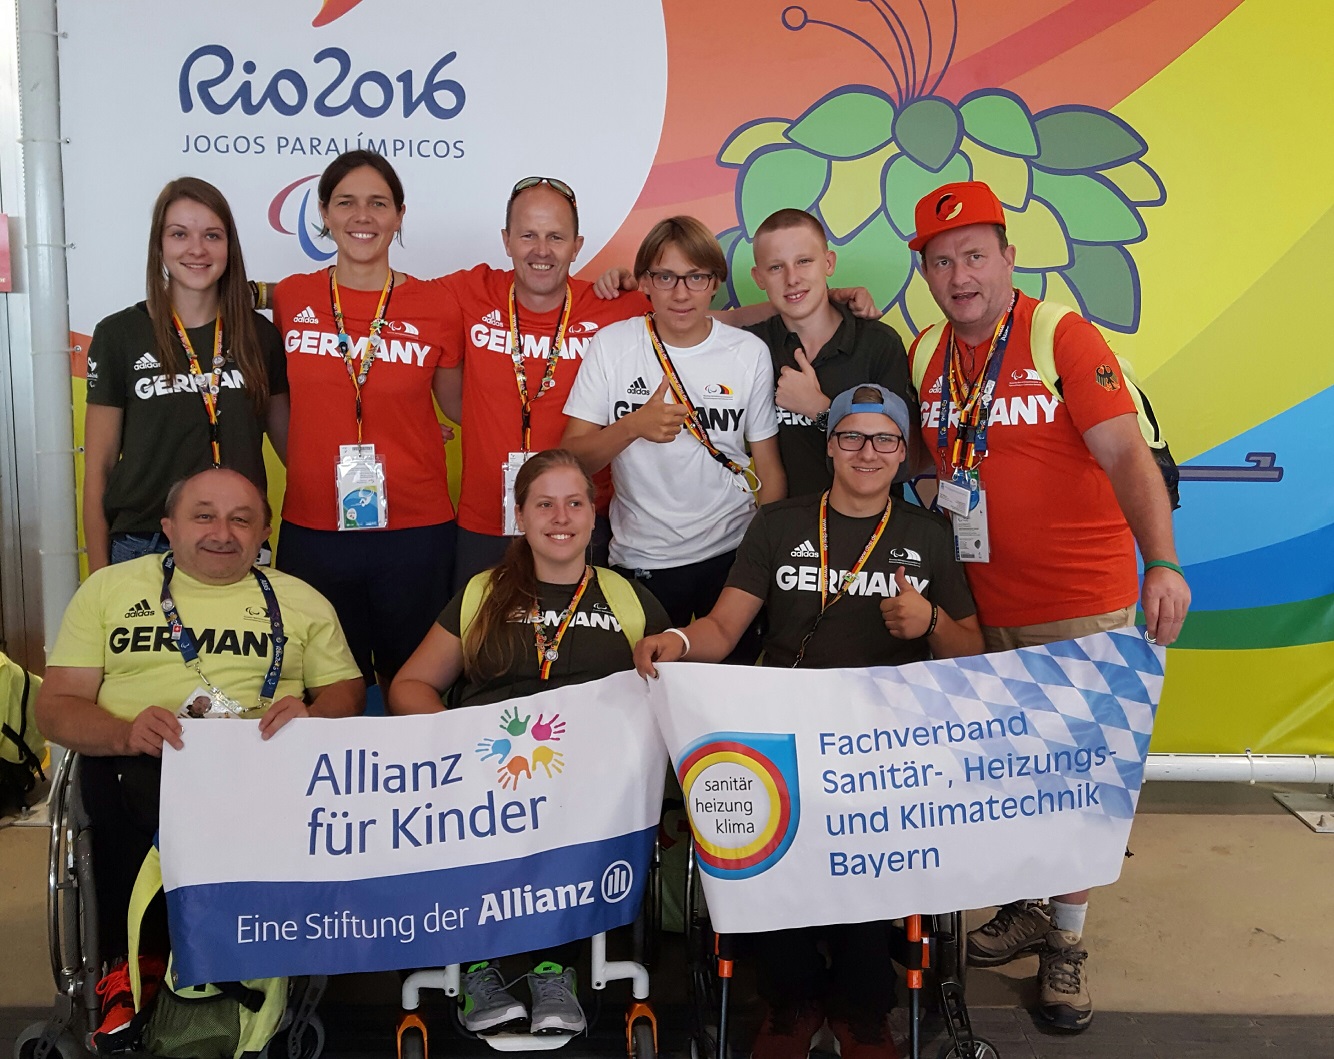 Paralympisches Jugendlager in Rio